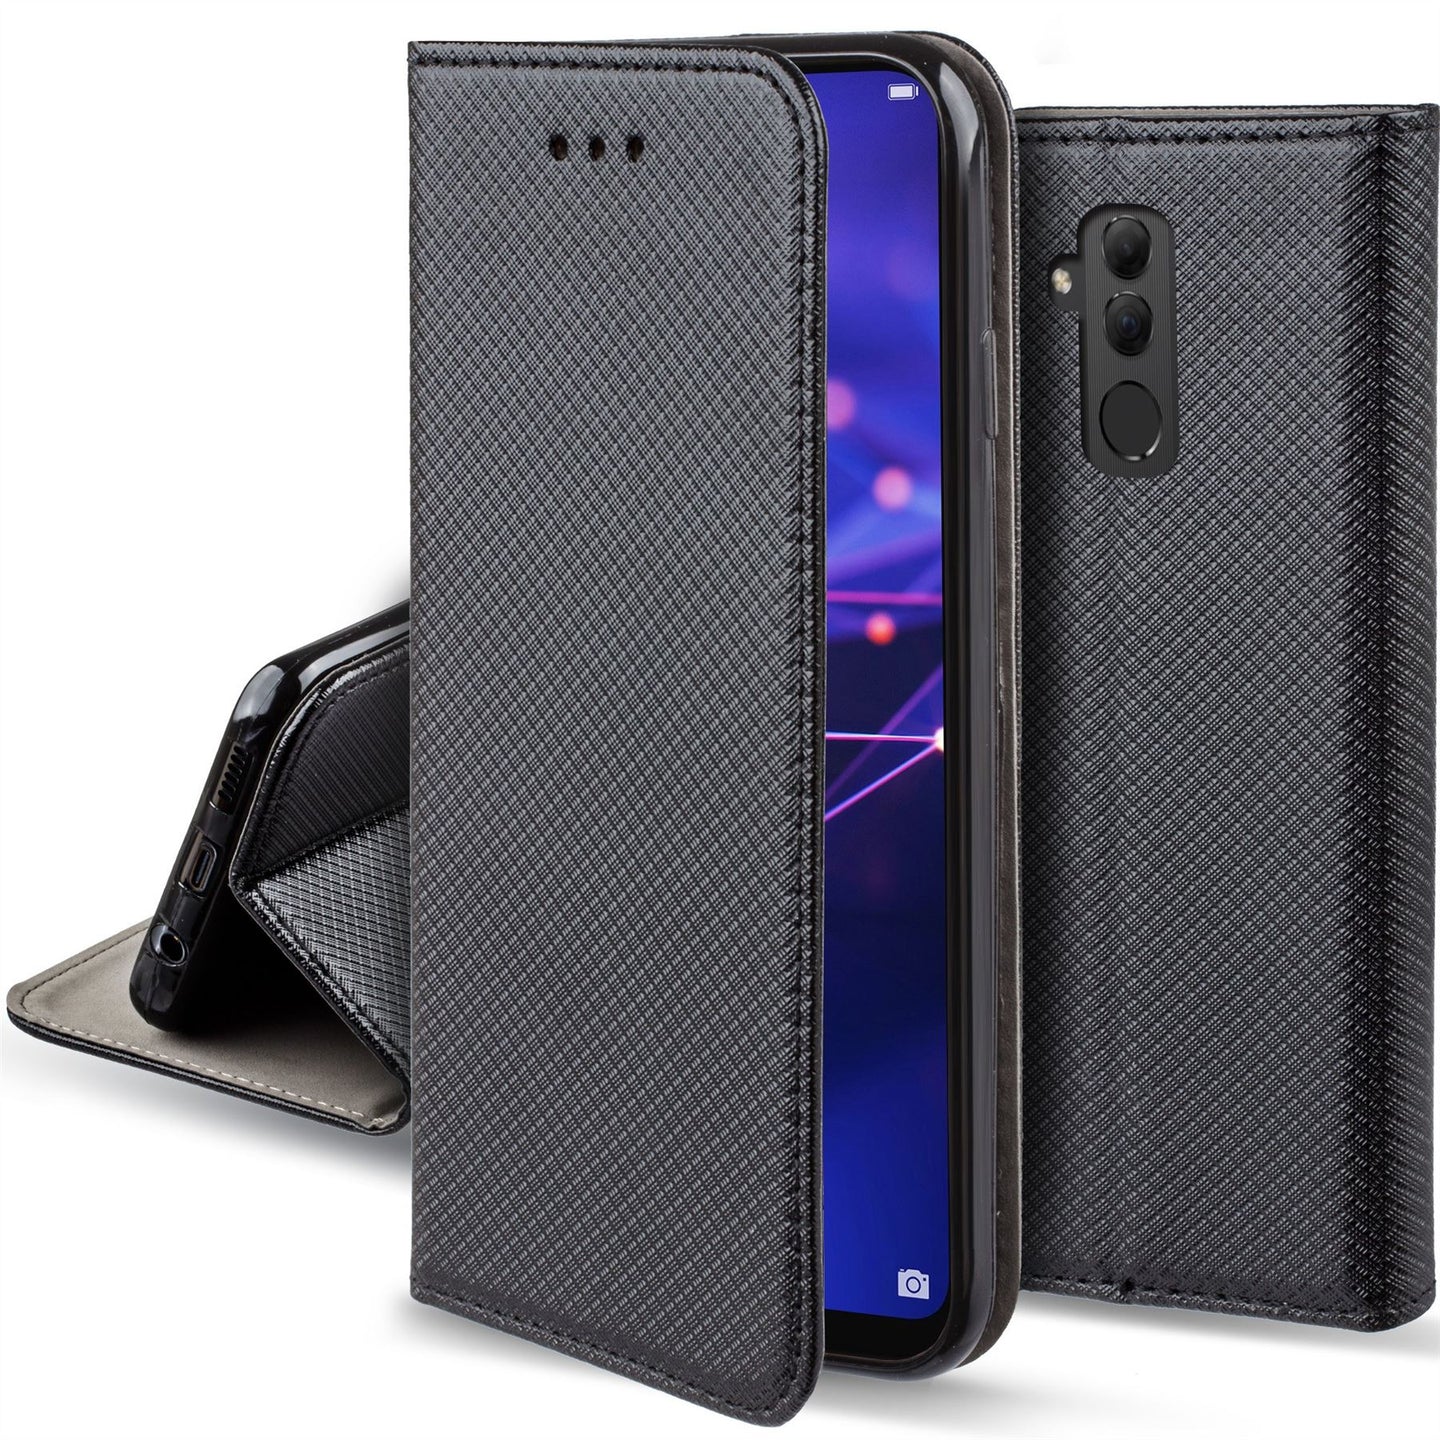 Moozy Case Flip Cover for Huawei Mate 20 Lite, Black - Smart Magnetic Flip Case with Card Holder and Stand